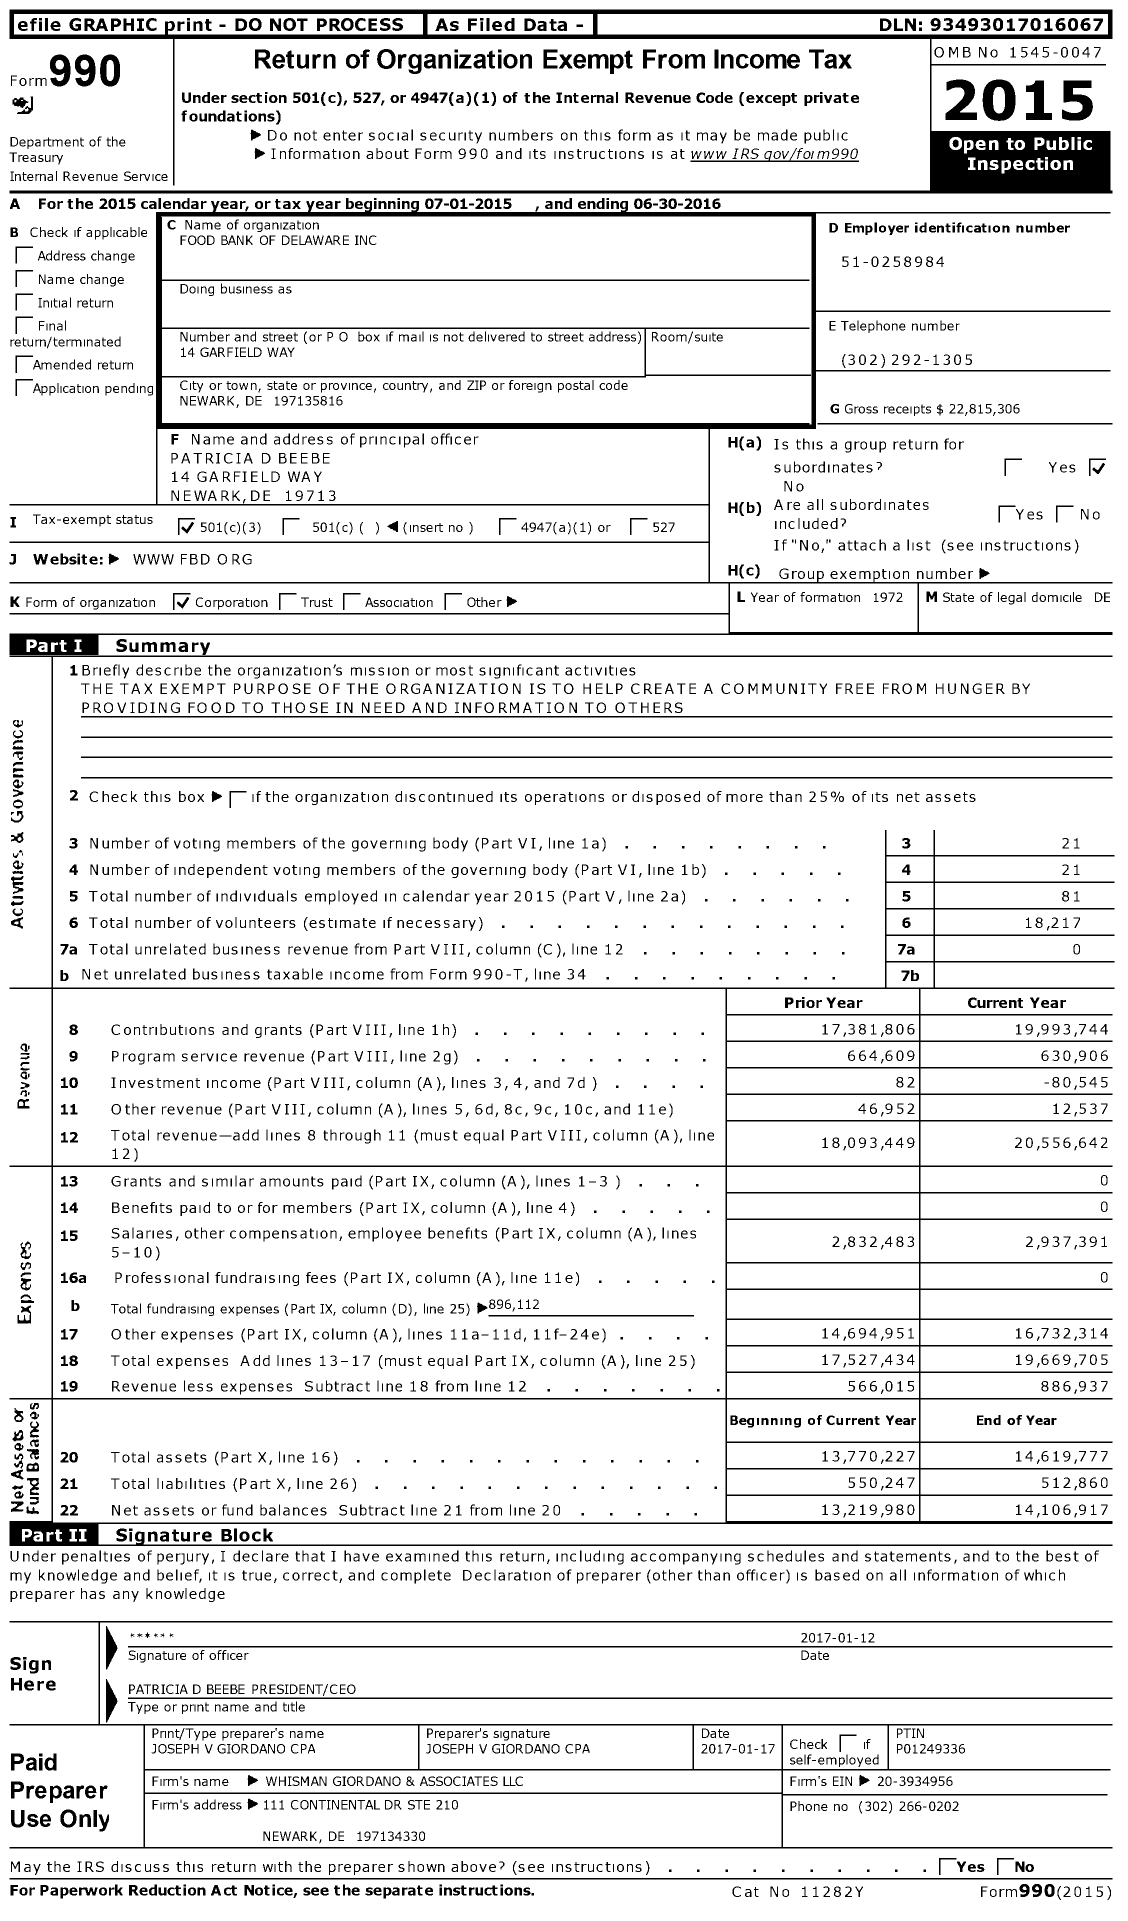 Image of first page of 2015 Form 990 for Food Bank of Delaware (FBD)